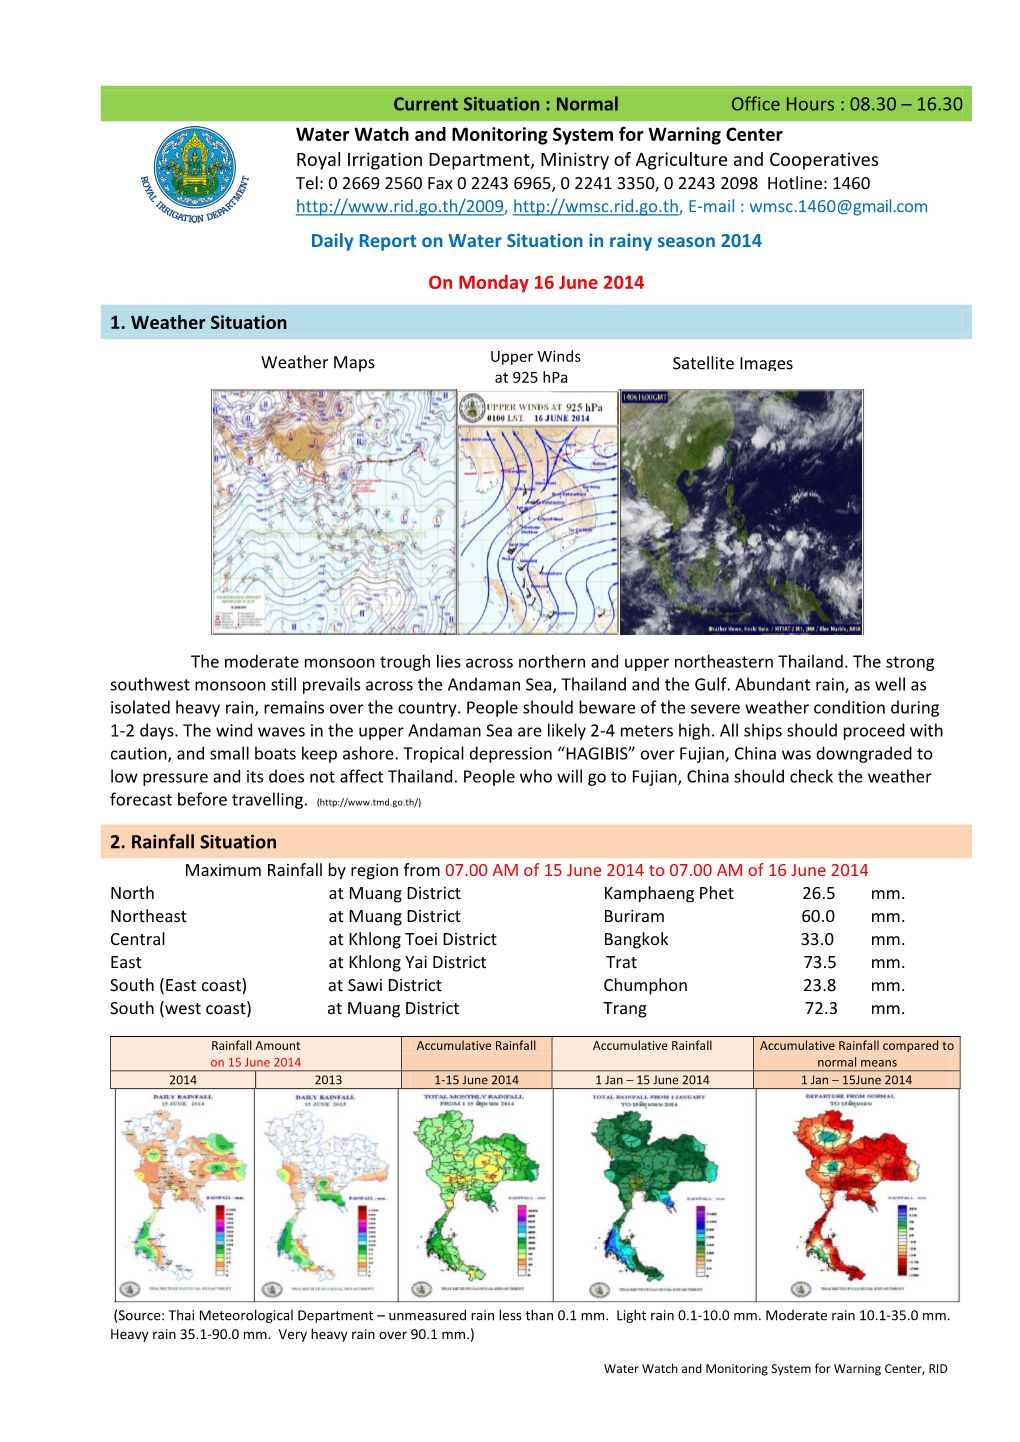 Report for Water Situation on Monday 16 June 2014